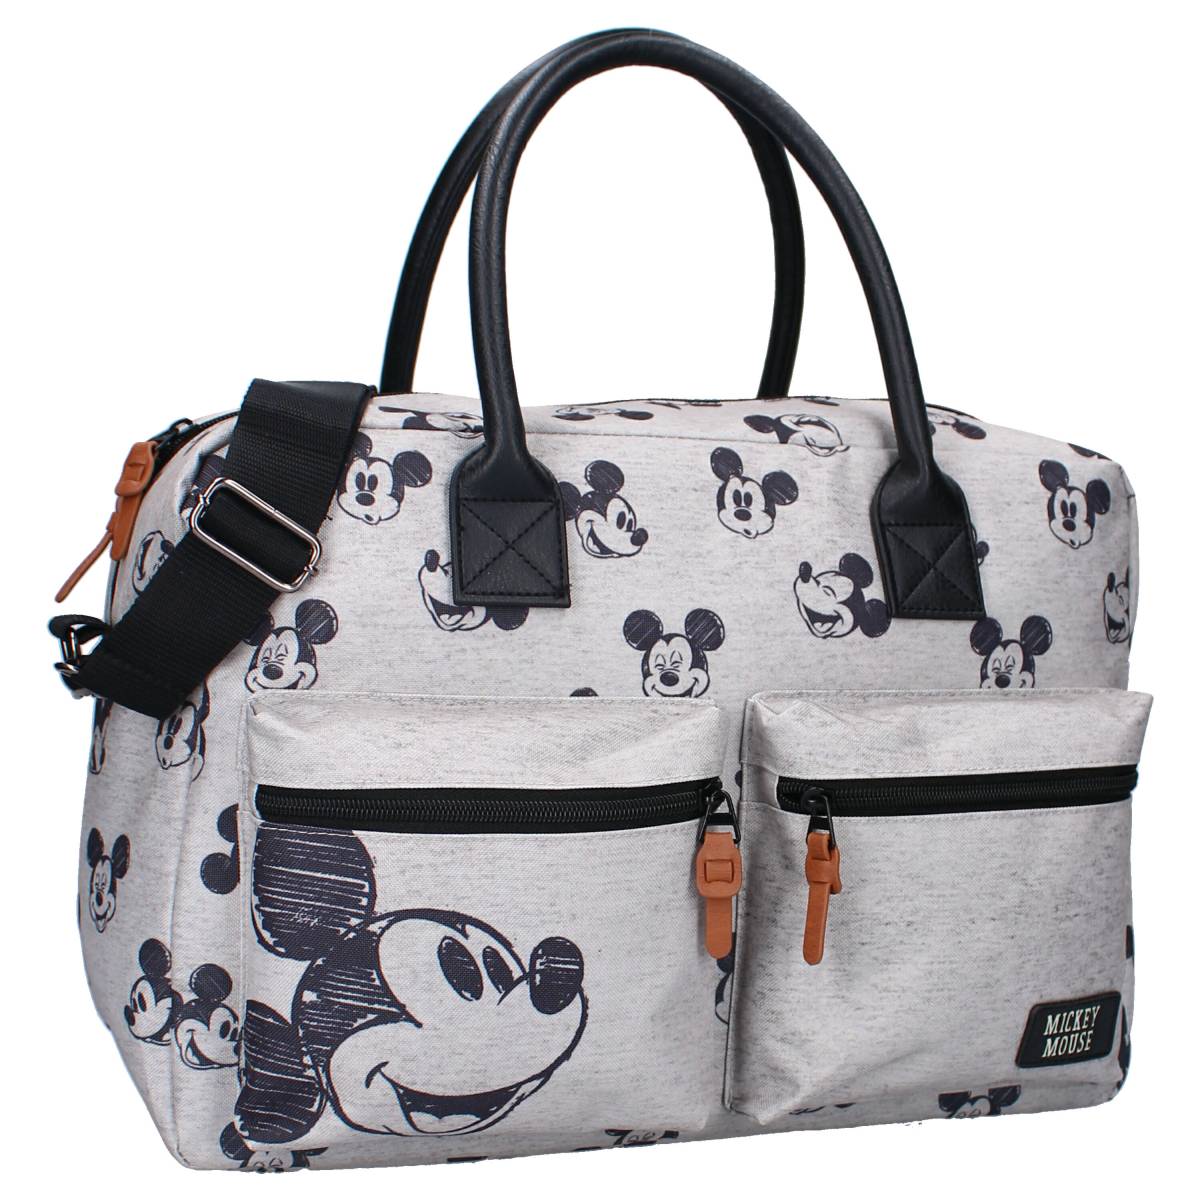 Wickeltasche Mickey Mouse Better care